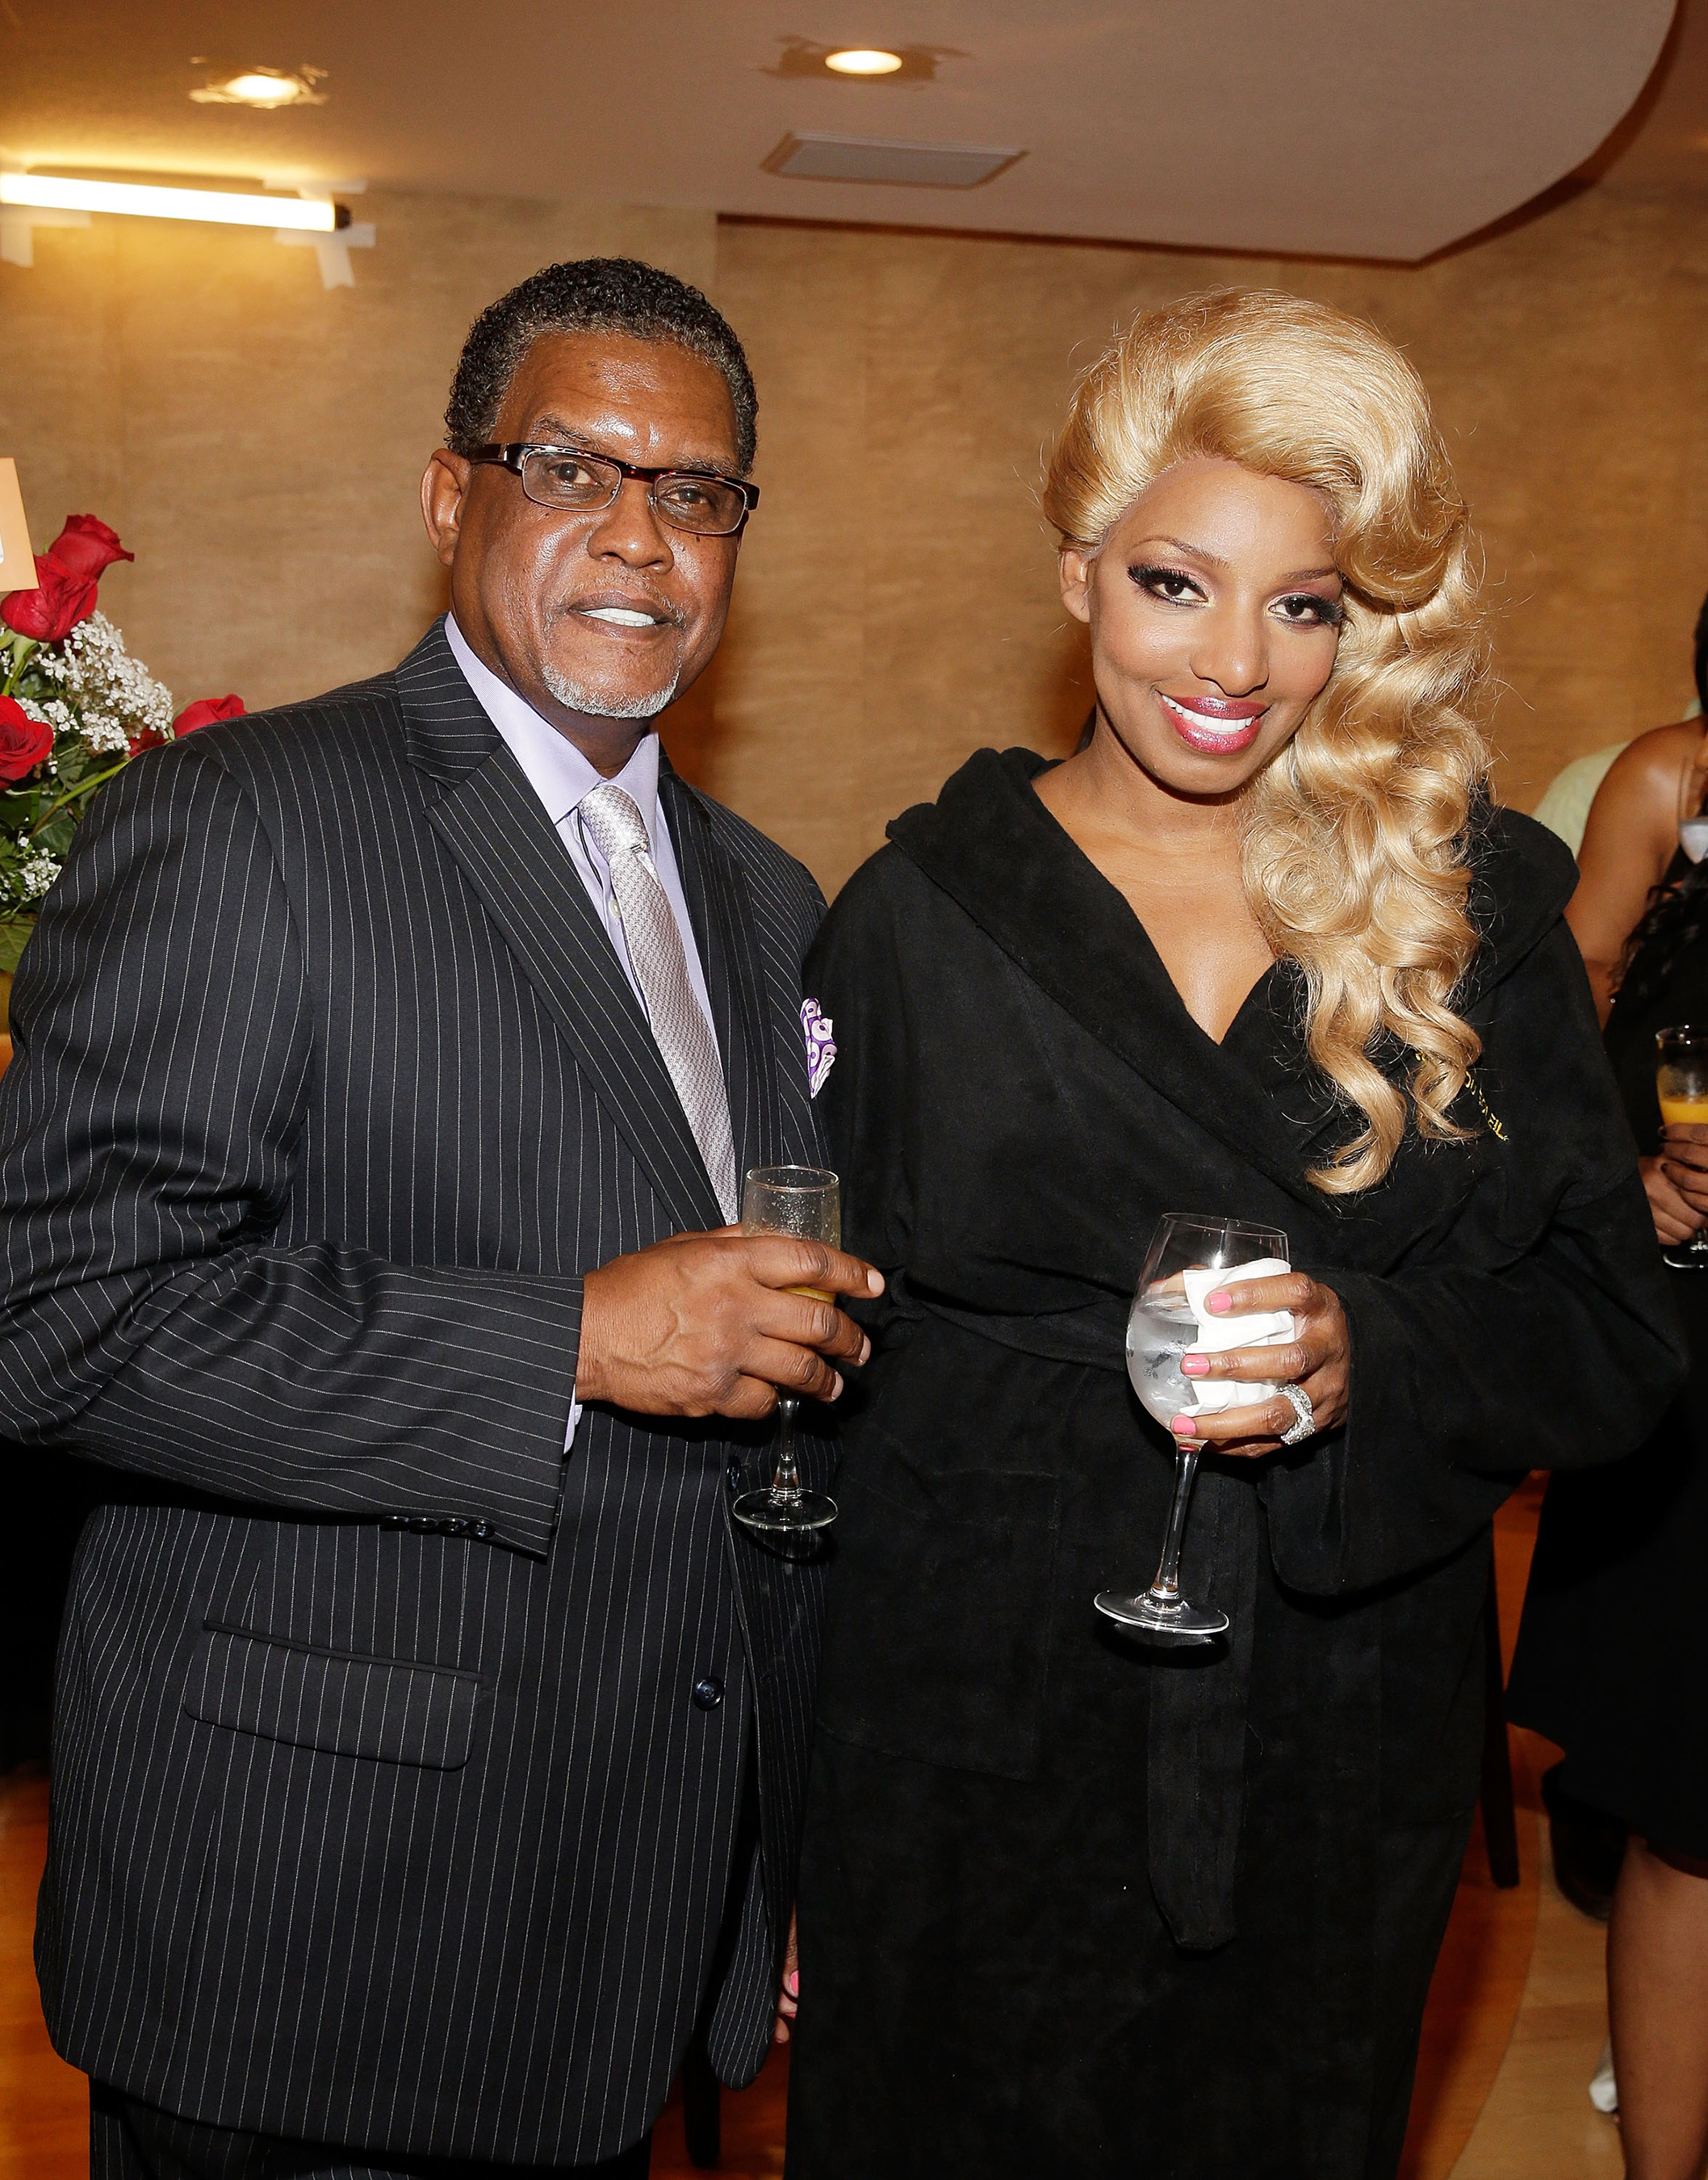 NeNe and Gregg Leakes at her debut performance in Zumanity, The Sensual Side of Cirque du Soleil in Las Vegas on June 27, 2014. Photo Credit: Isaac Brekken/Getty Images